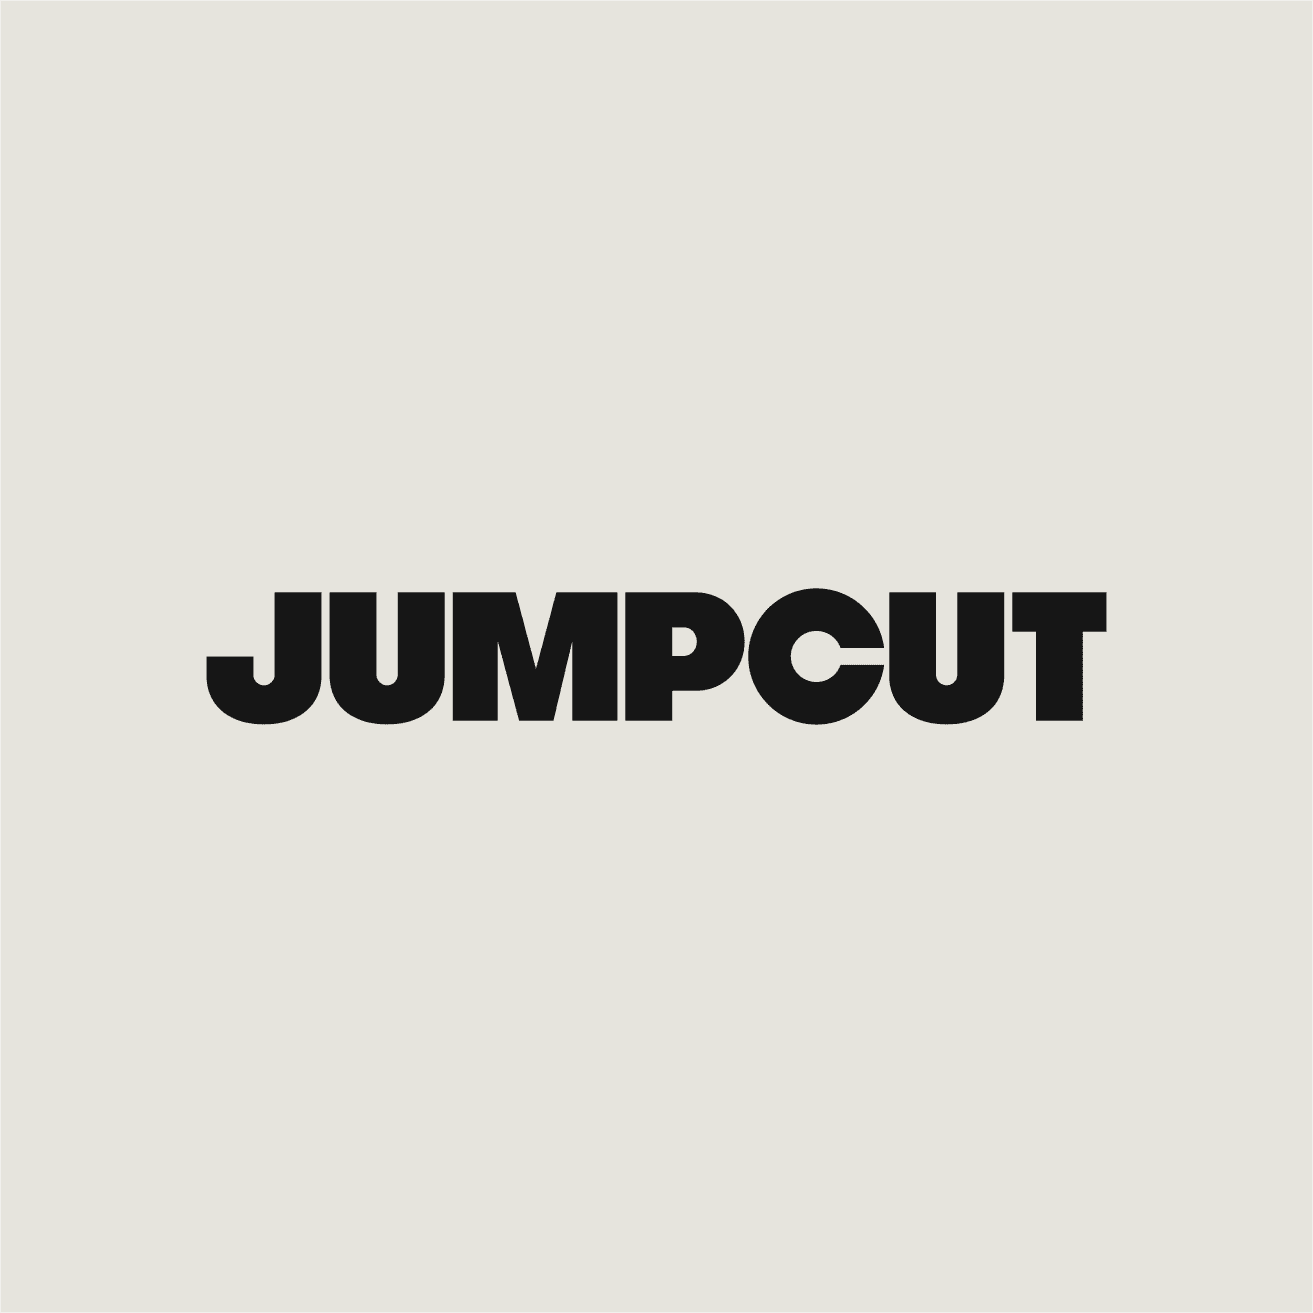 Logo image for Jumpcut